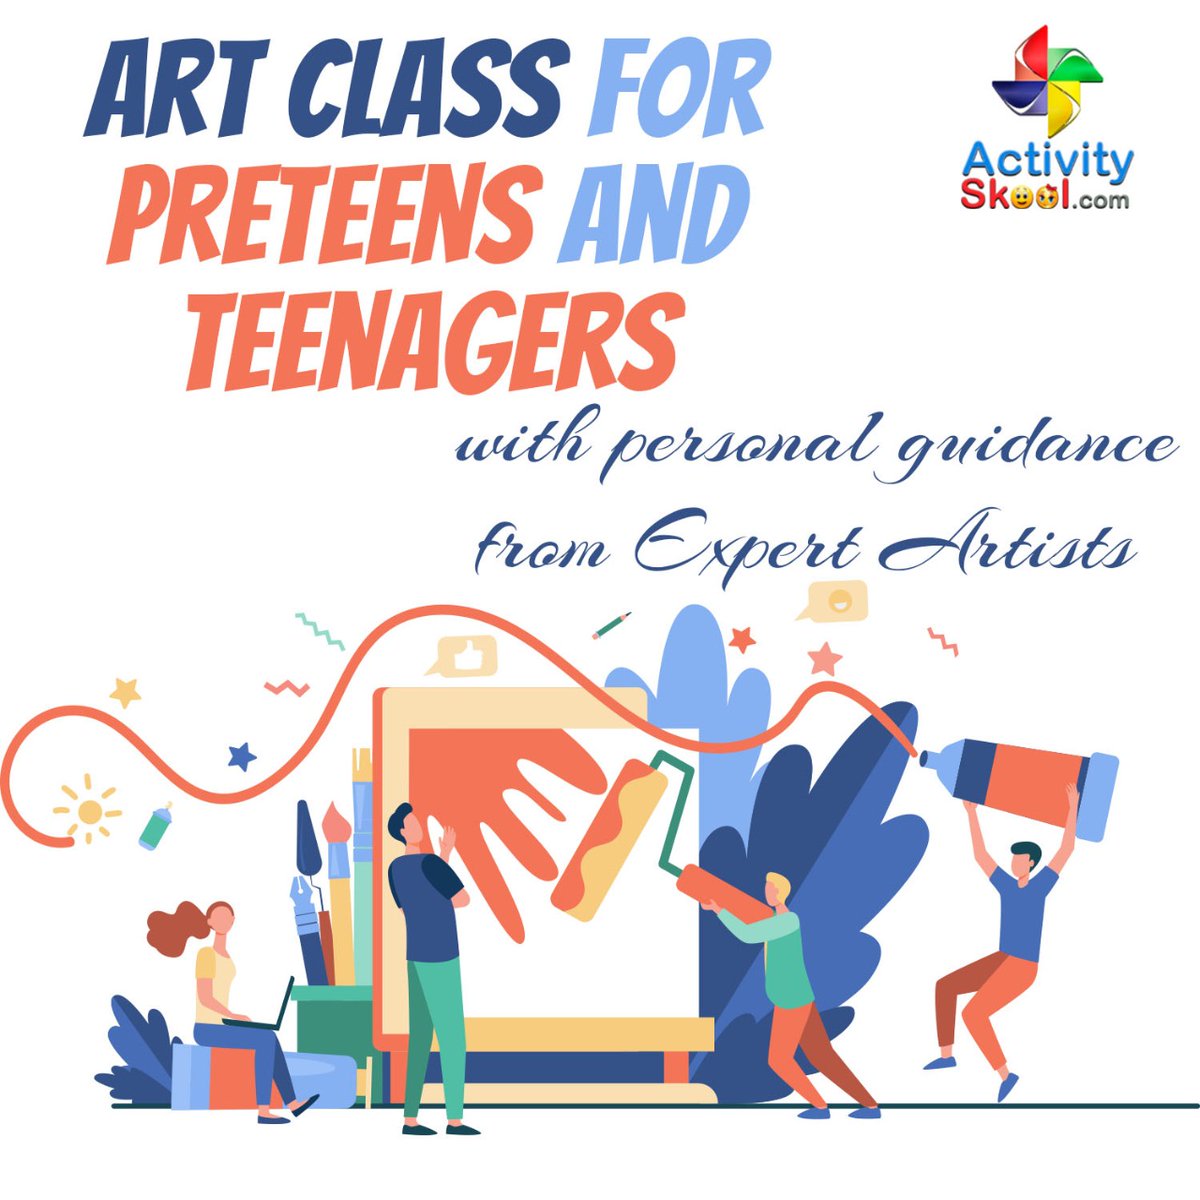 Art classes for #preteens and #teens with personal guidance from #art experts conducting #artclassesforteens on #ActivitySkool 
.
.
#onlineartclasses #artclassesonline #artclassonlineforkids #teensartclasses